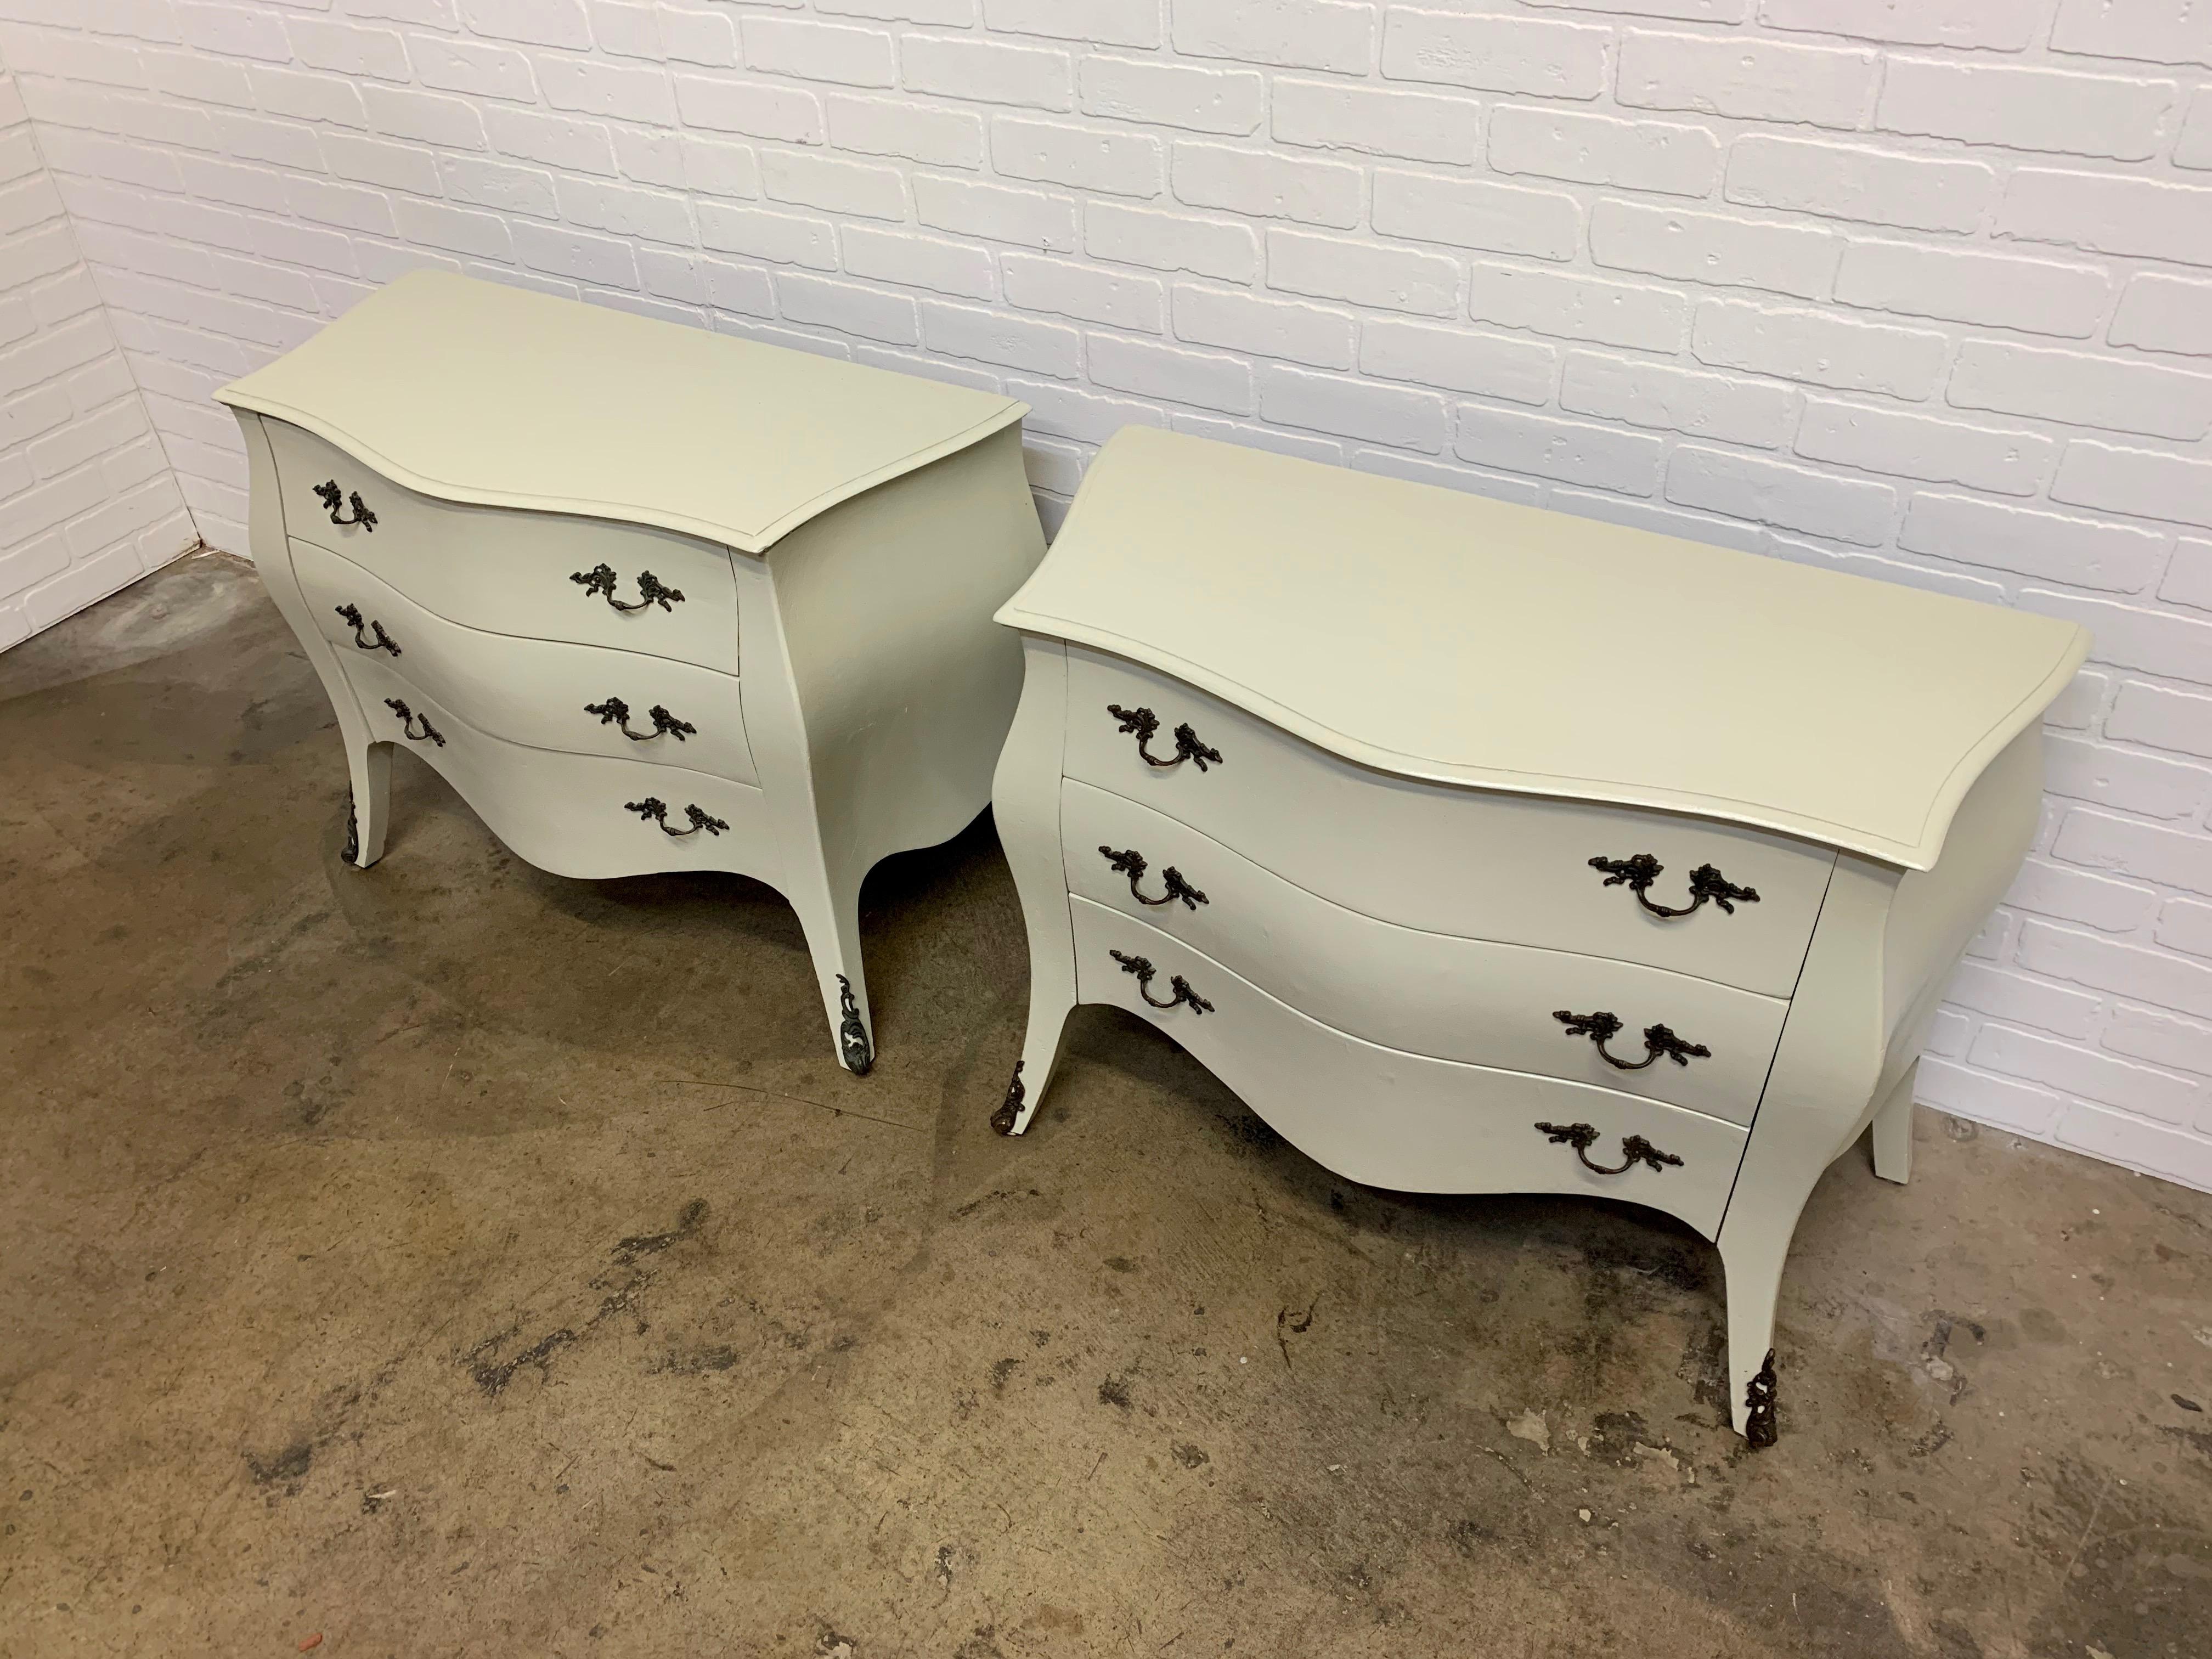 commodes for sale